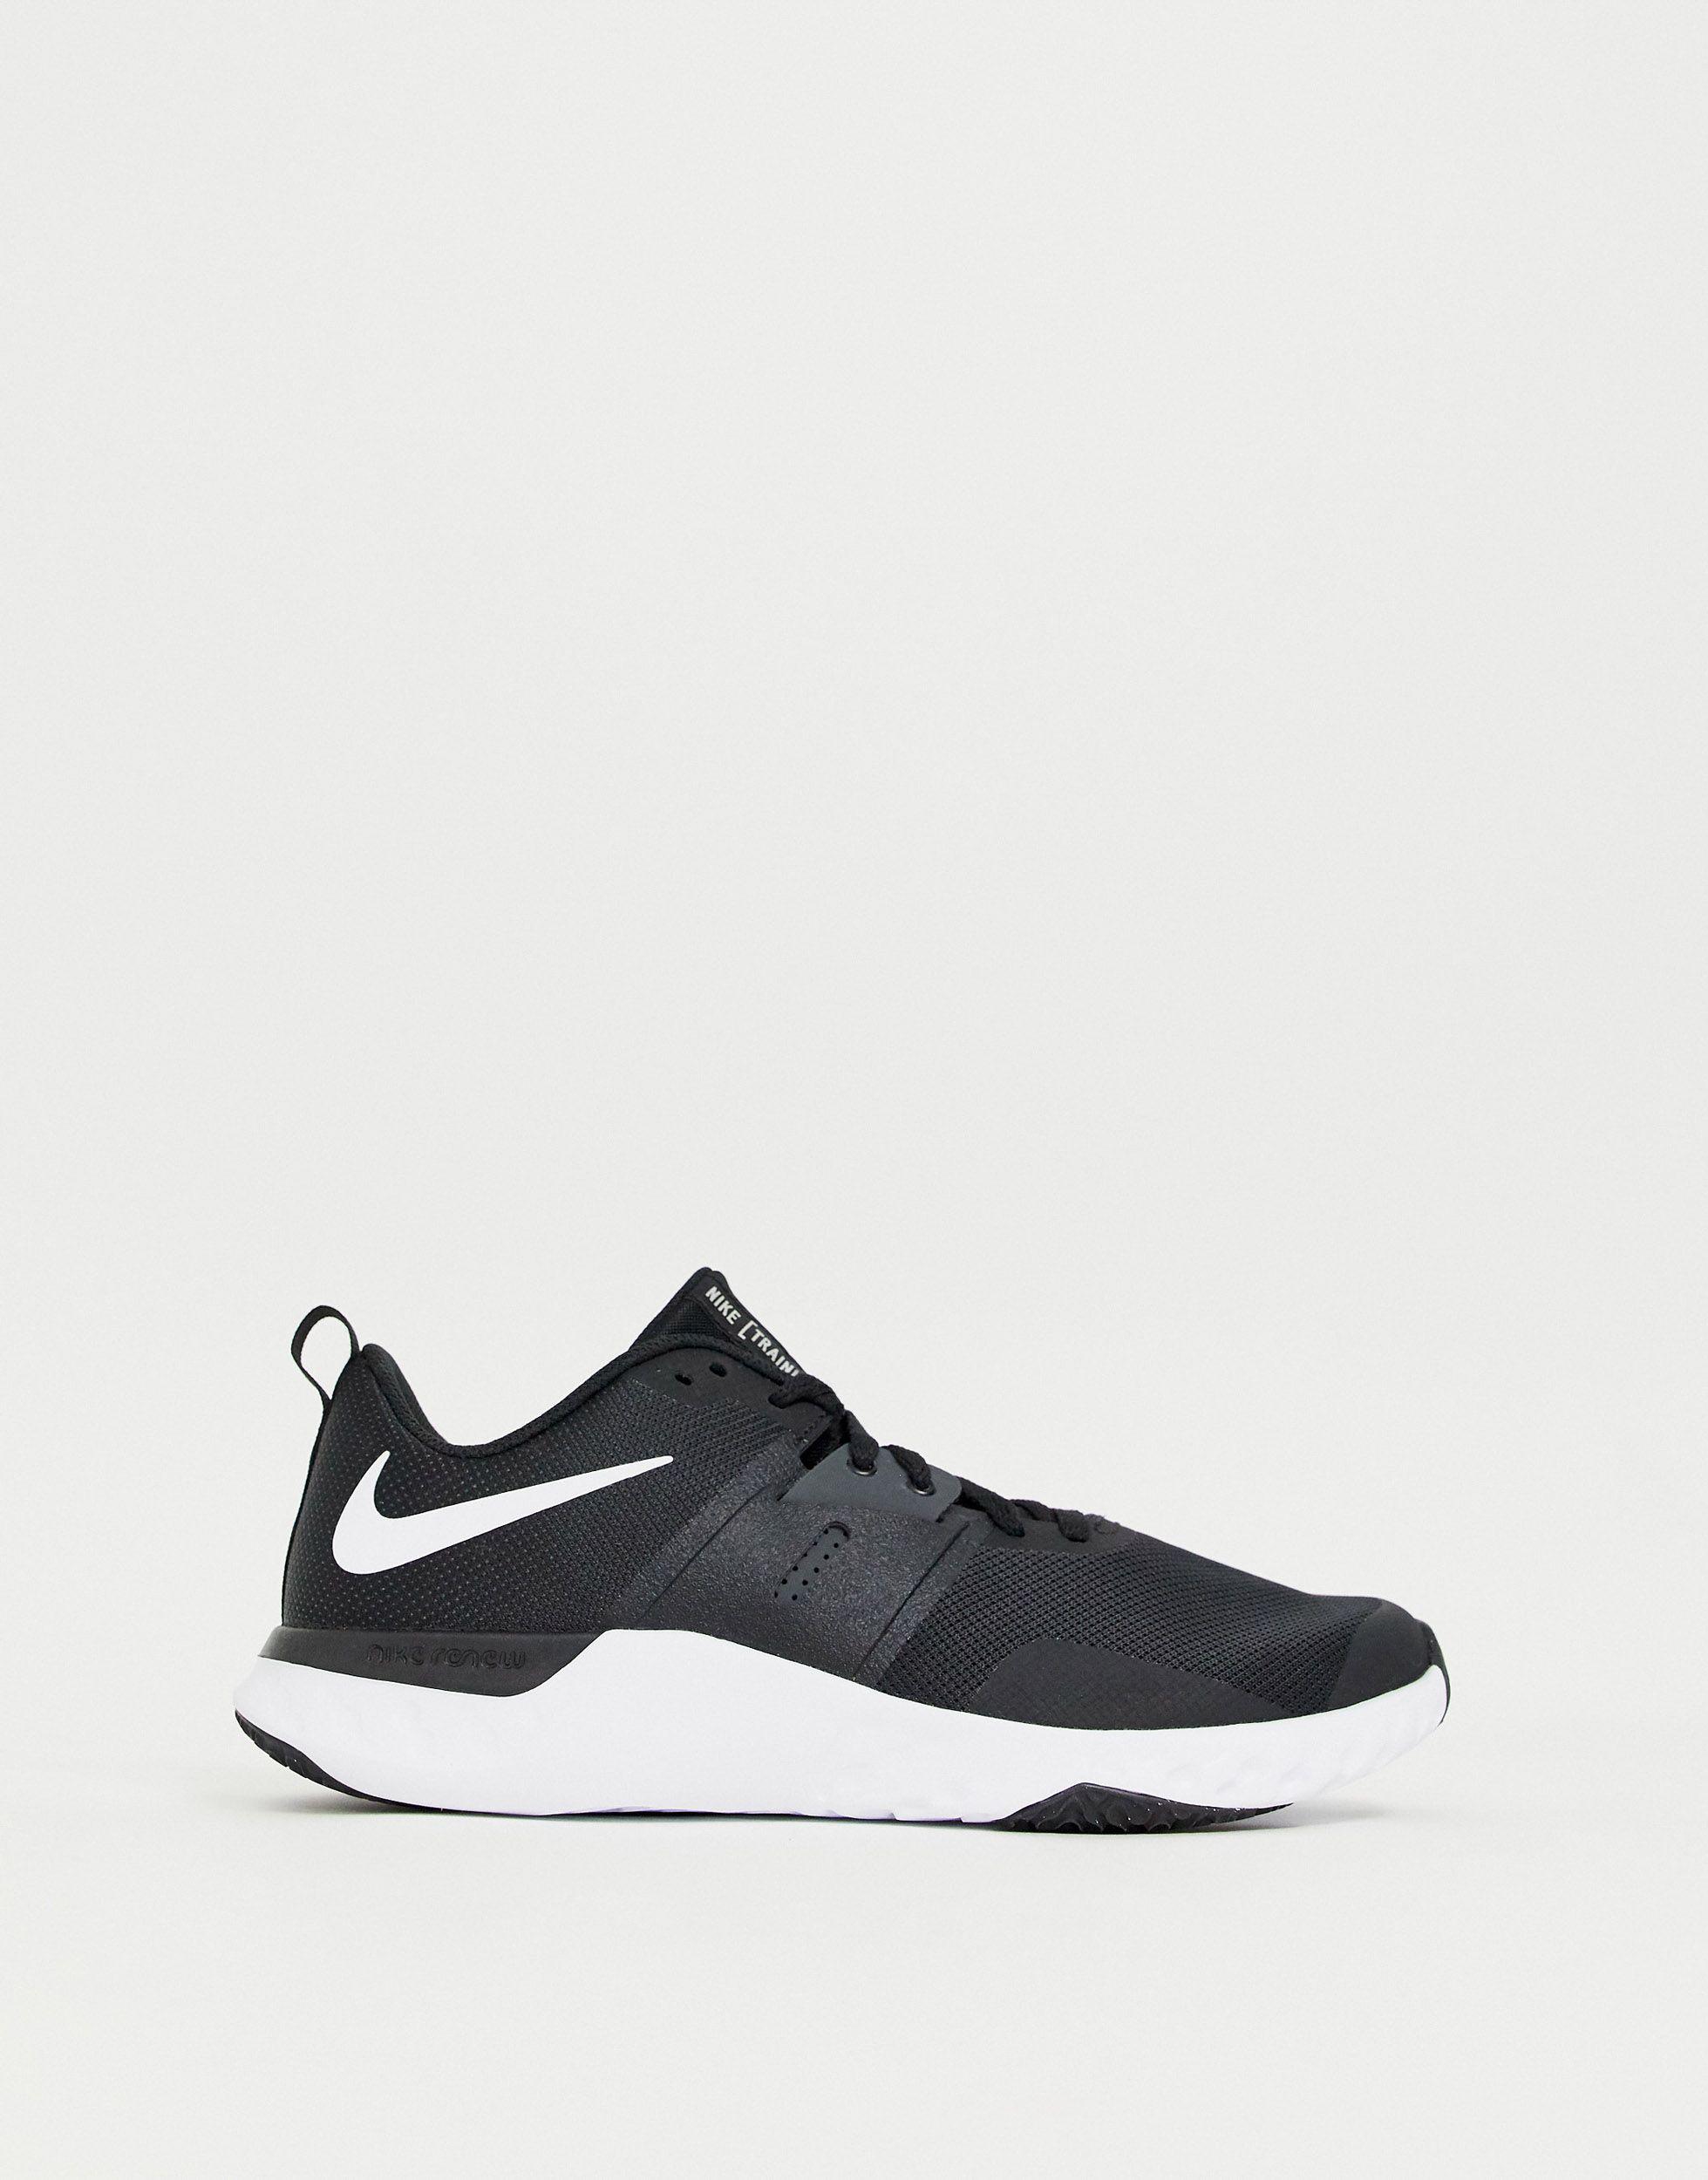 Nike Lace Renew Retaliation Tr 2 Training Shoes in Black,Cool Grey,White  (Black) for Men | Lyst